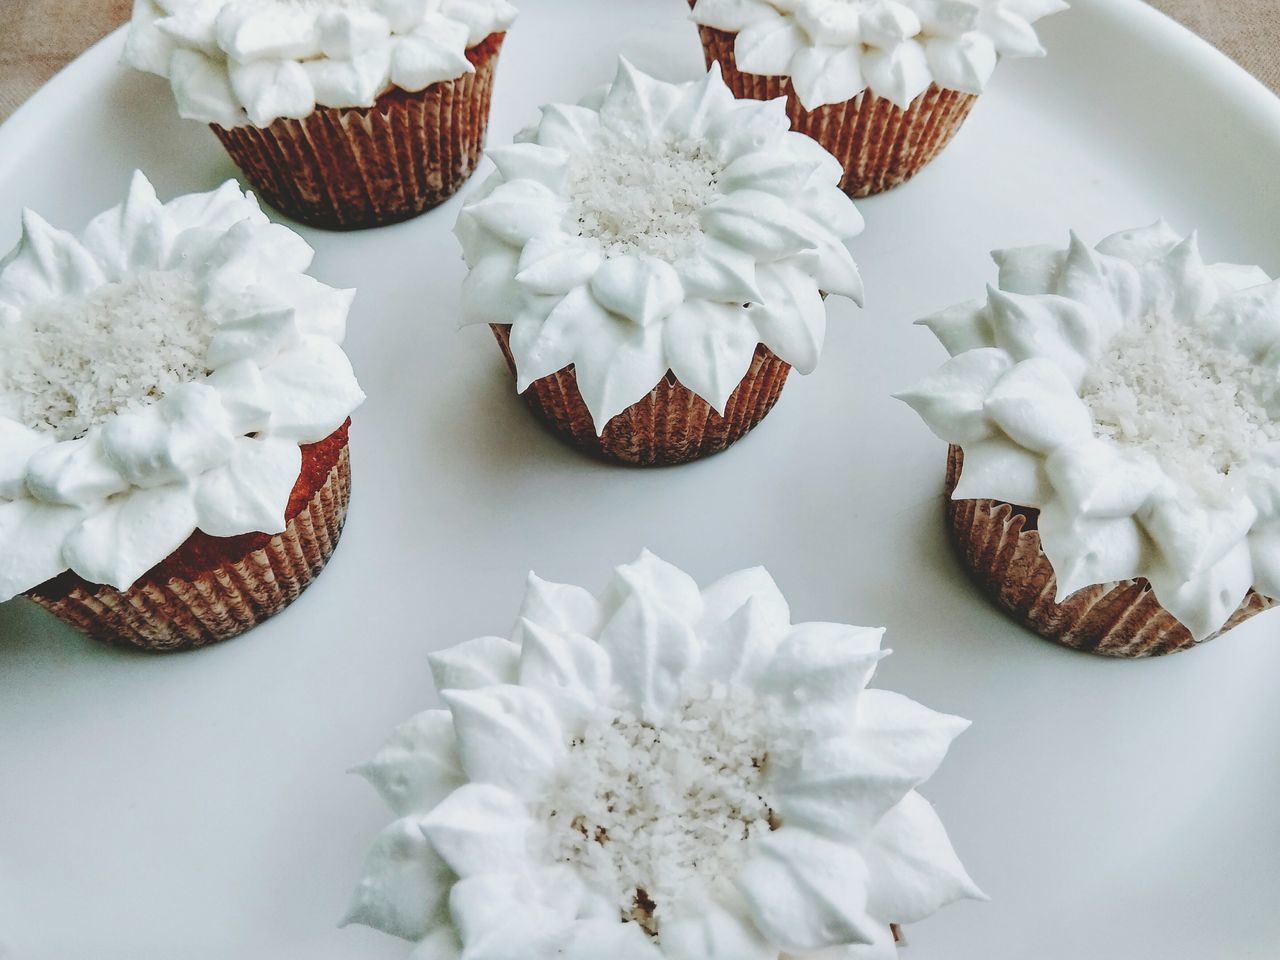 indulgence, food and drink, high angle view, sweet food, still life, white color, food, cupcake, table, dessert, no people, freshness, unhealthy eating, indoors, temptation, flower, celebration, day, close-up, white background, ready-to-eat, flower head